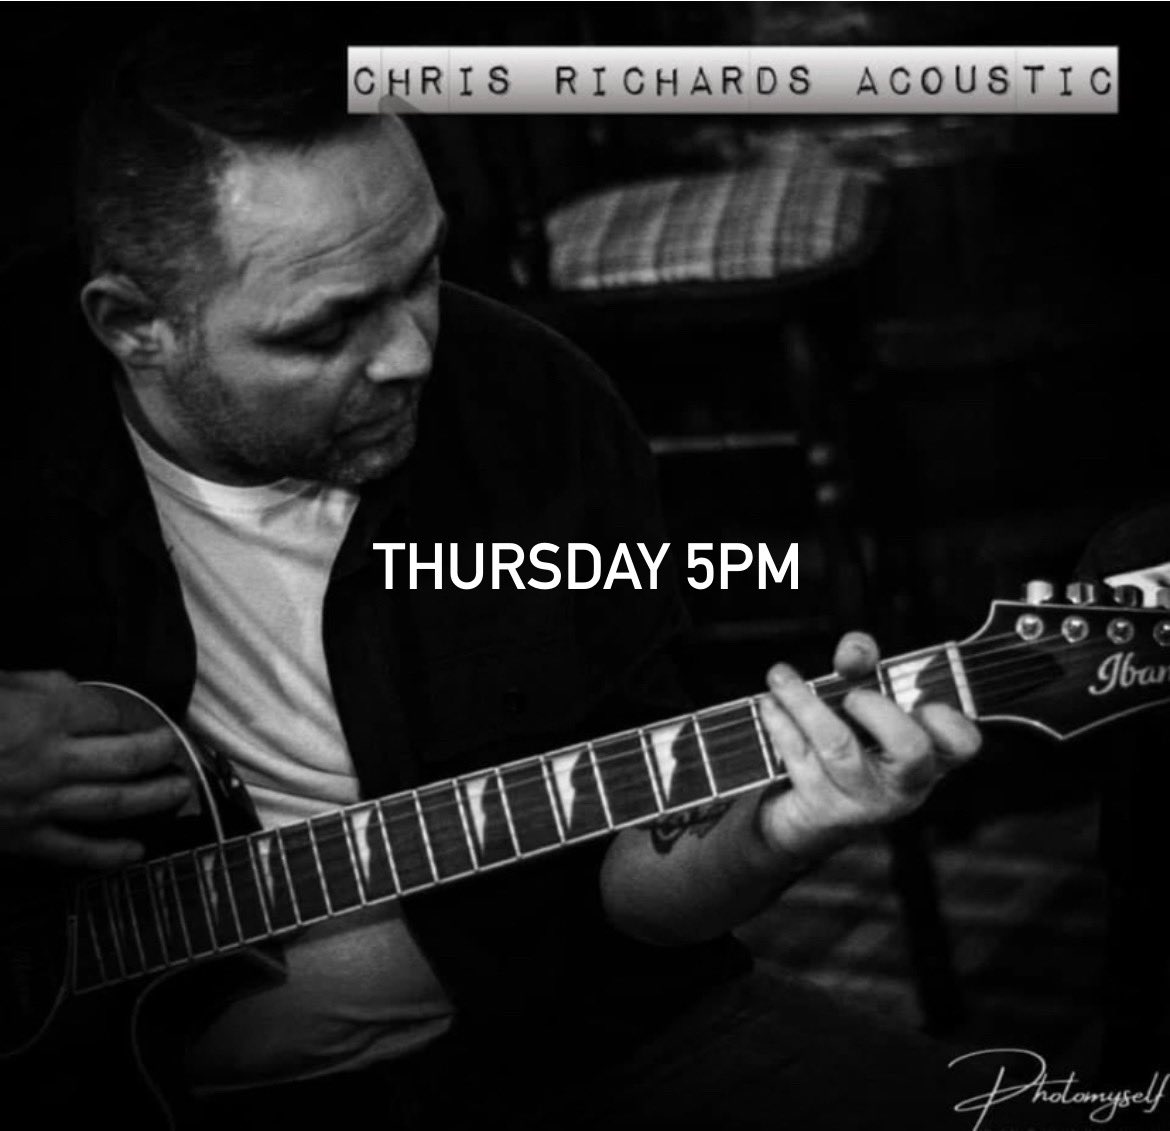 🎸Thursday Club🕺🏼 Chris Richards returning this evening from 5pm🎸 Enjoy the show with 10% off your Pint🍻or wine🍷 or 2 hand crafted cocktails for £8🍹🍹* Mon-Fri 5-7pm Great Ale🍻 Great Music🎸 Great Times🕺🏼 #afterwork #greatale #thursdaymusic #vaults #livemusic #microbar